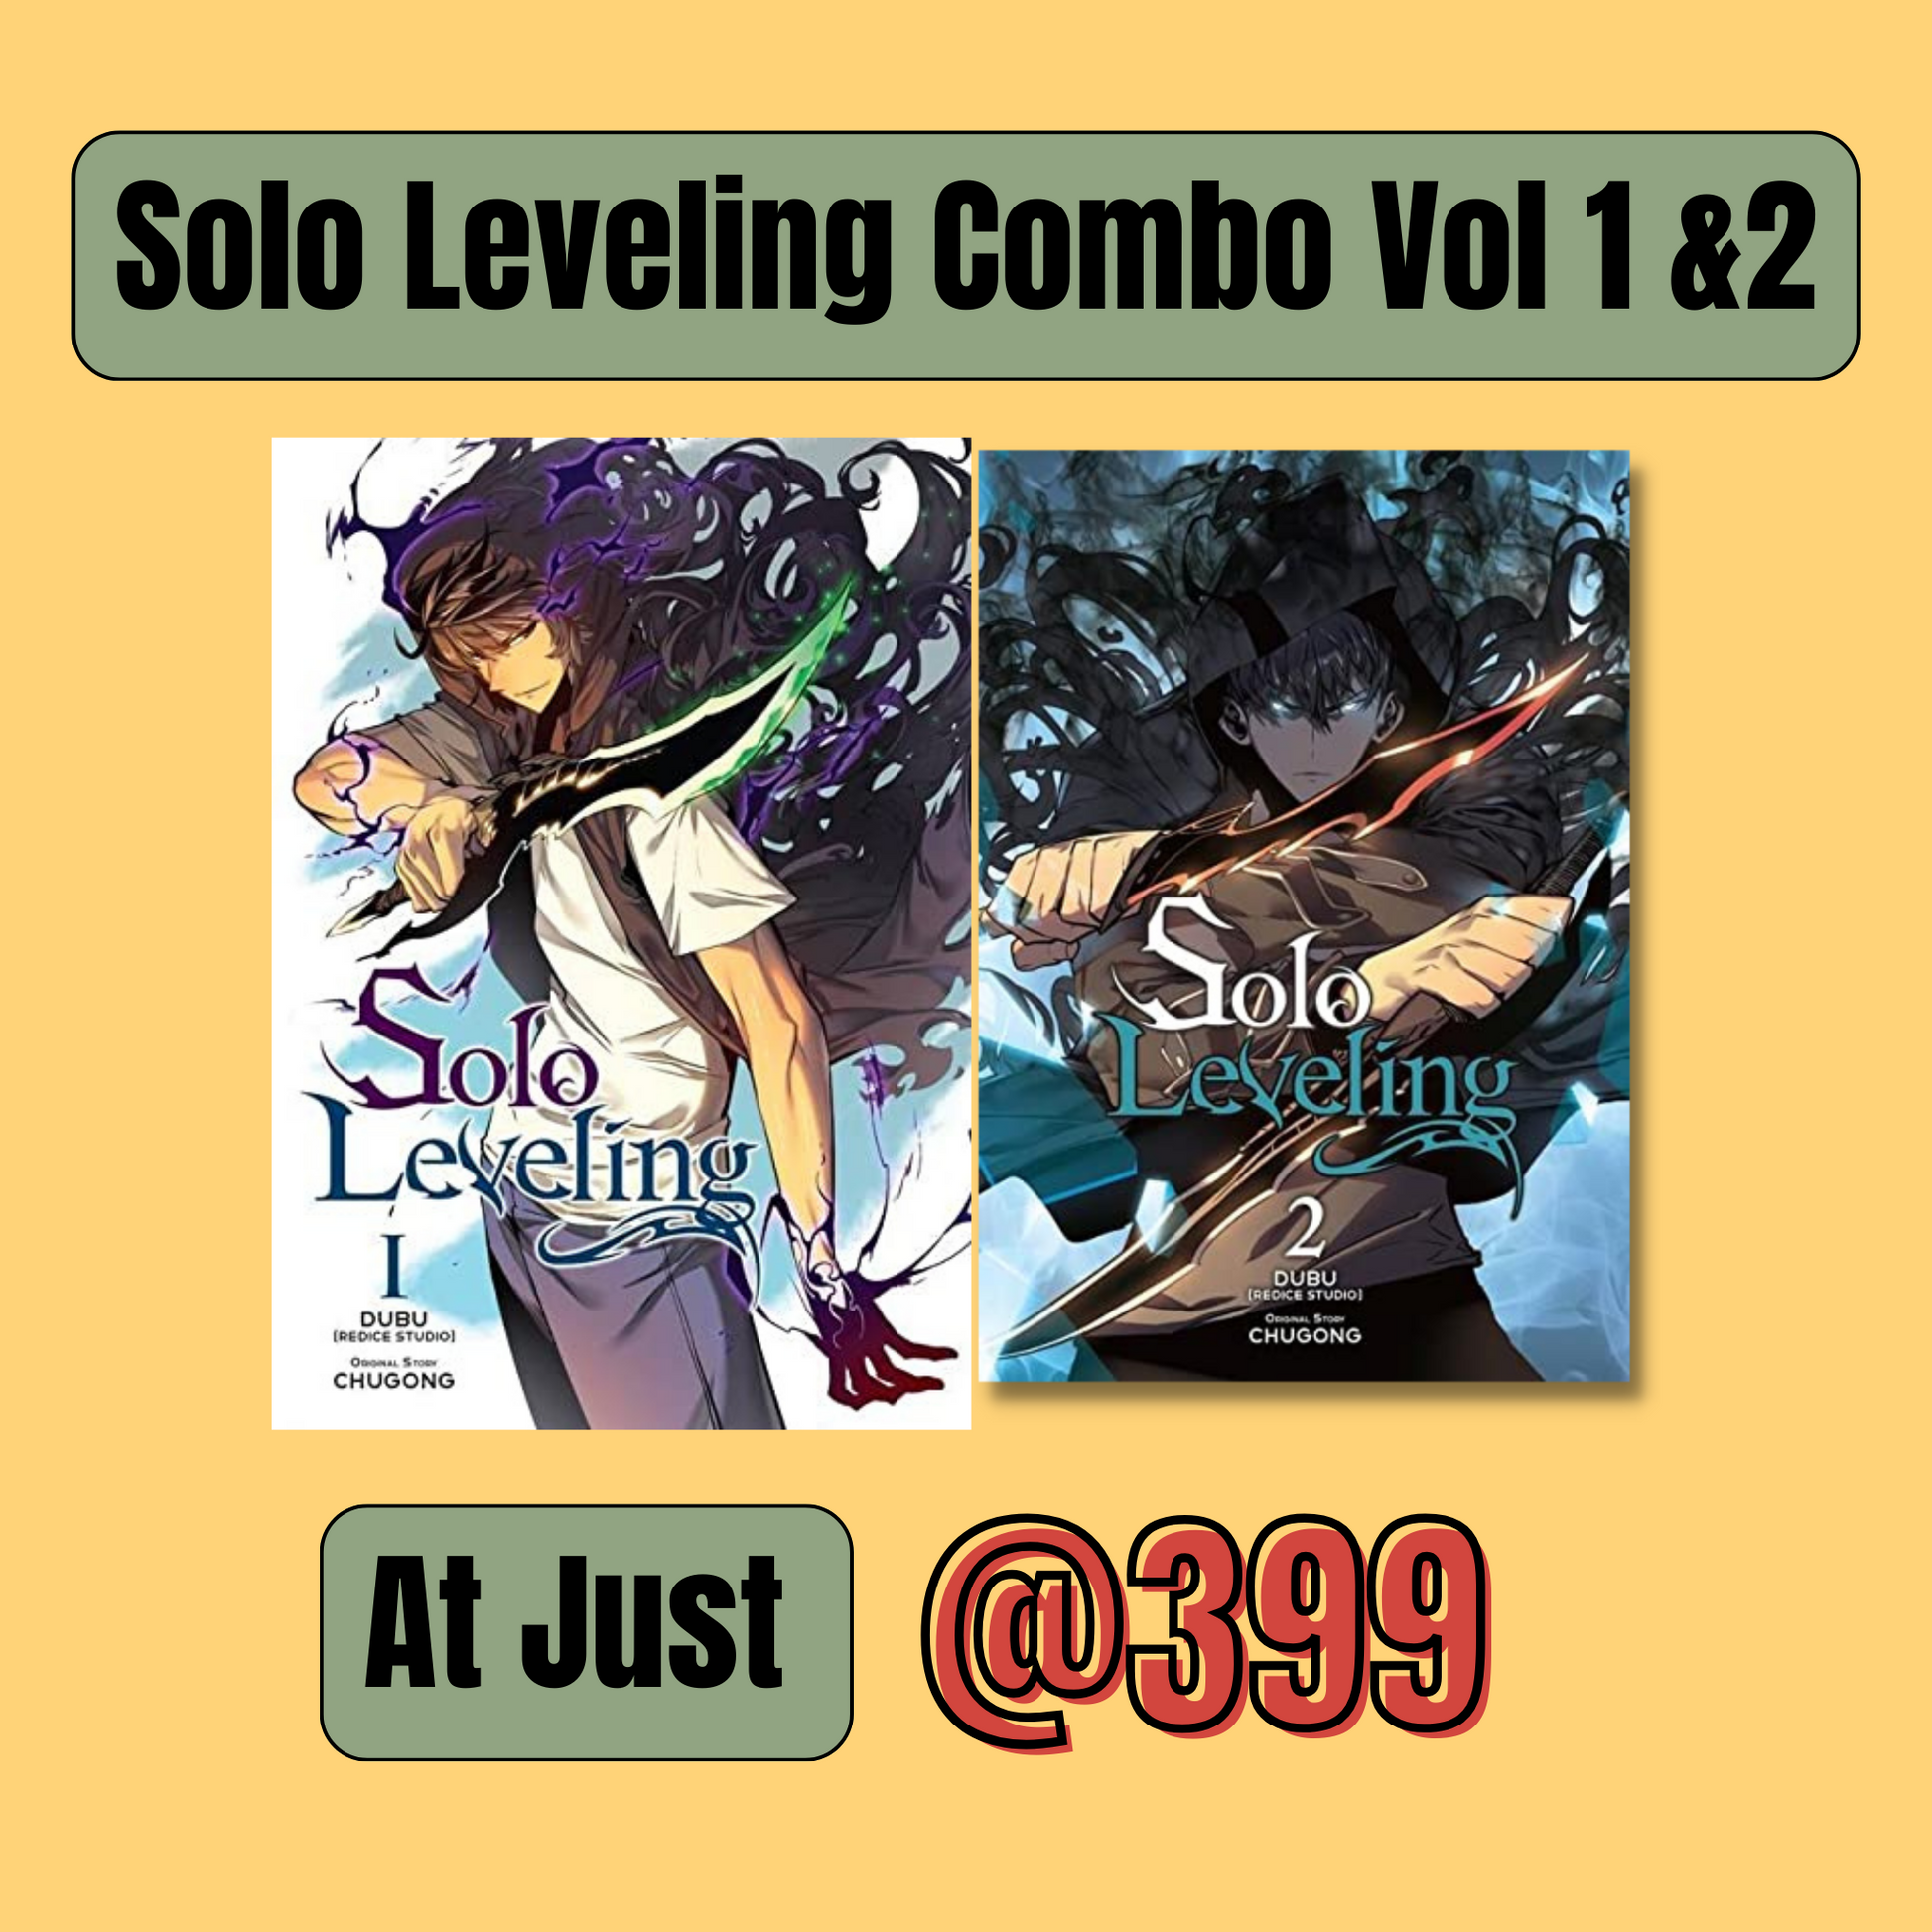 Solo Leveling Combo: Vol 1 & 2 by Chugong (Black and White, Paperback) -  Gyaanstore